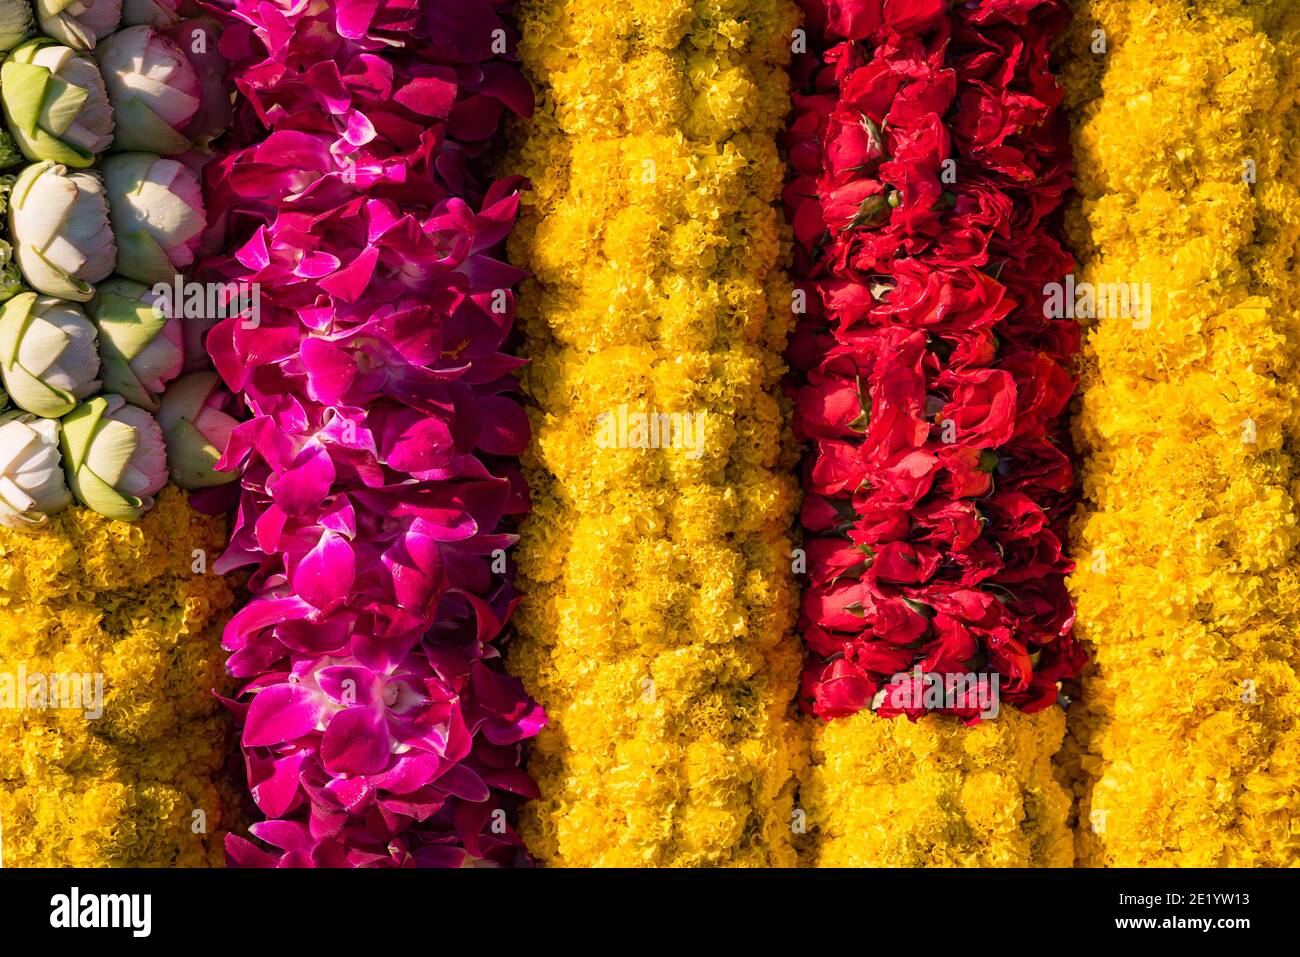 Garlands made of fresh flowers: yellow marigolds, red roses, pink orchids, and lotuses. Close-up. Holiday decoration in Thailand. Stock Photo